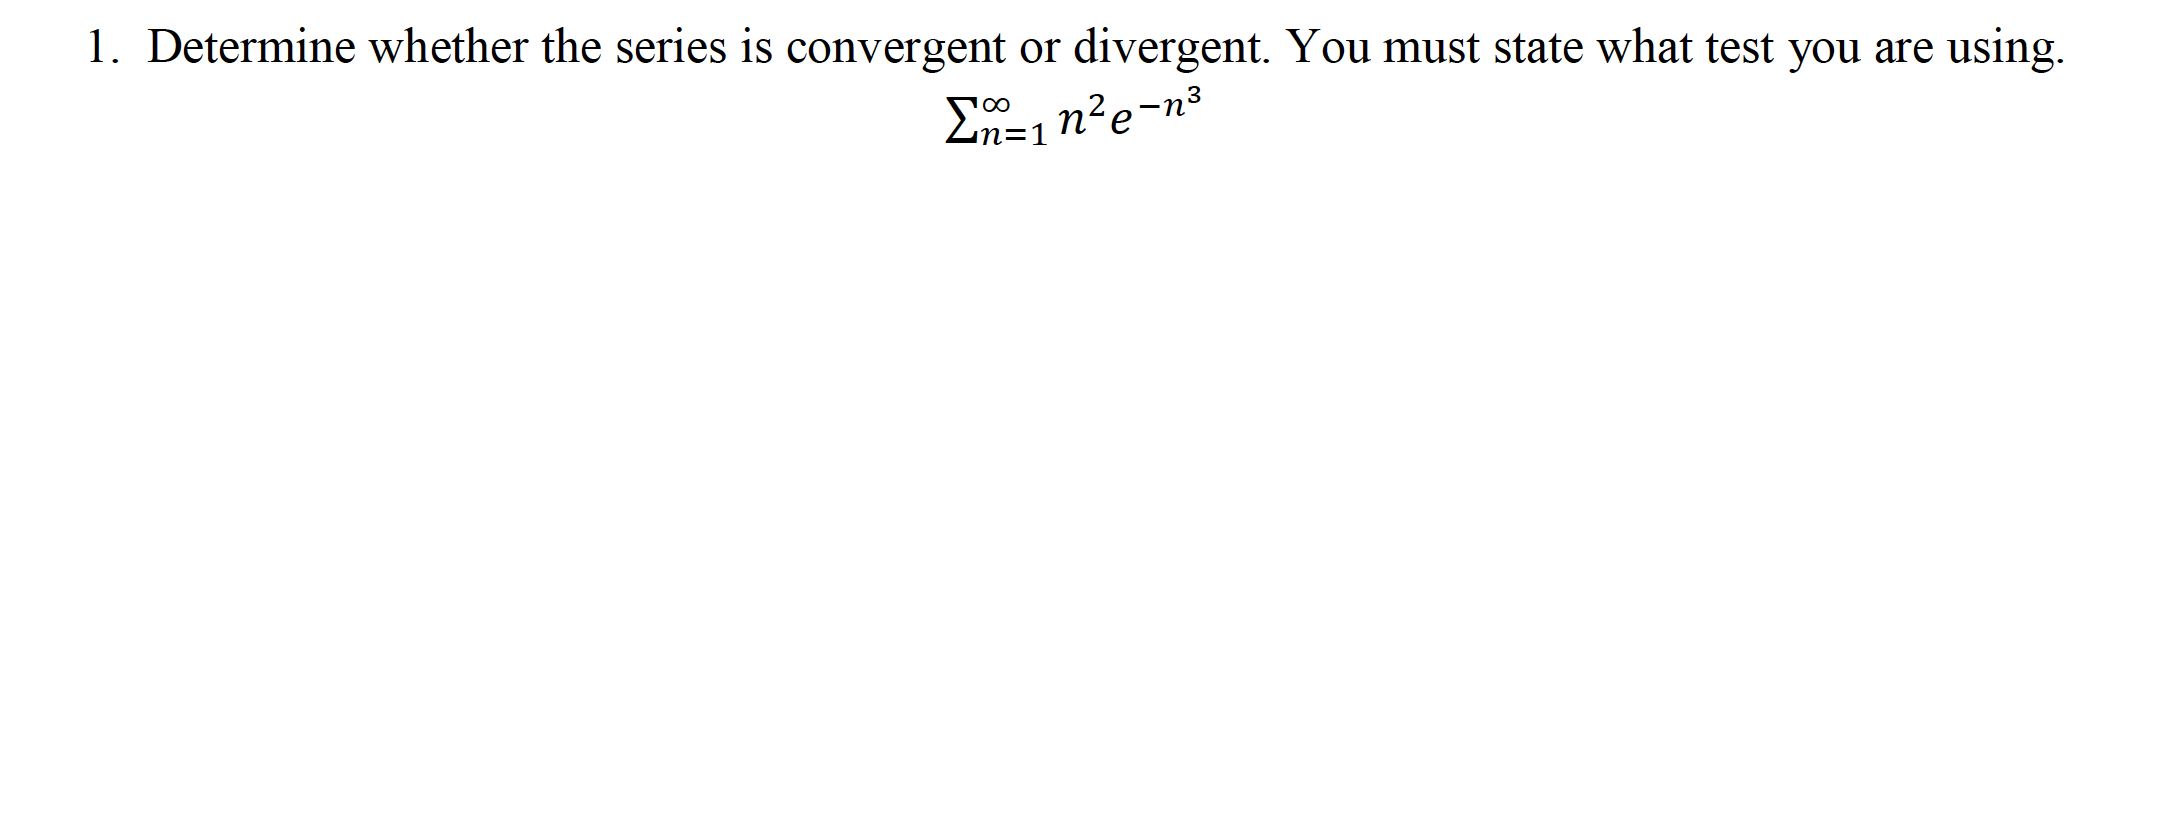 1. Determine whether the series is convergent or divergent. You must state what test you are using.
n²e-n³
un=1
